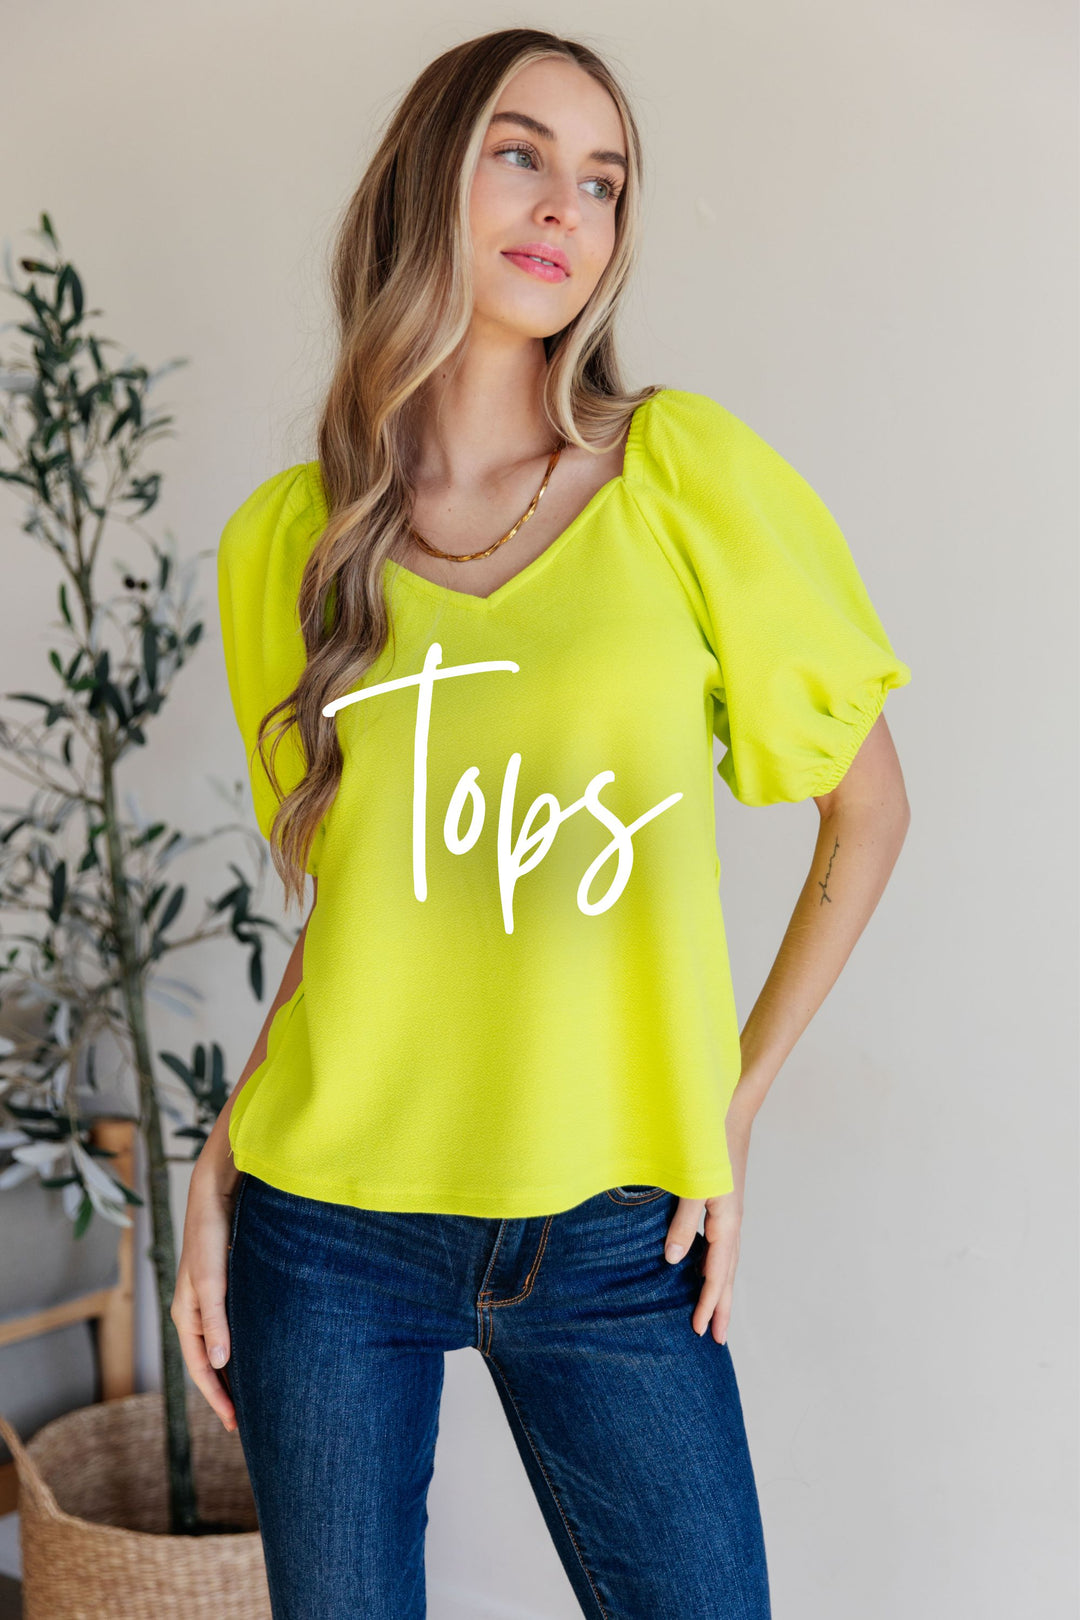 Women's Boutique Shirts and Tops Collection